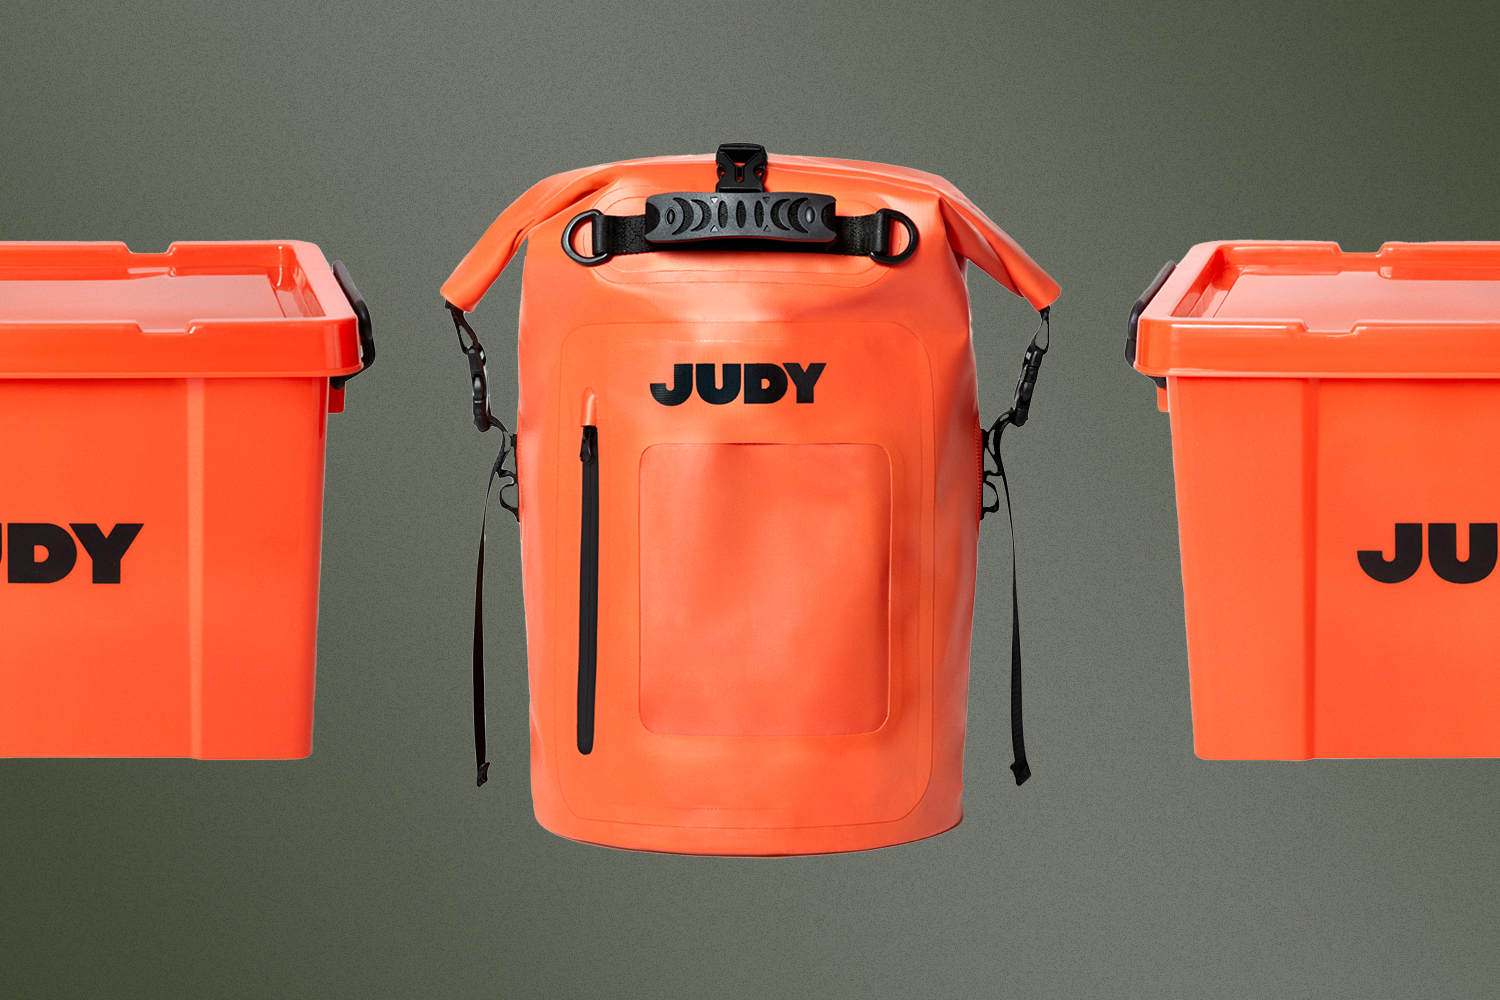 Judy Emergency Kits and Go Bags